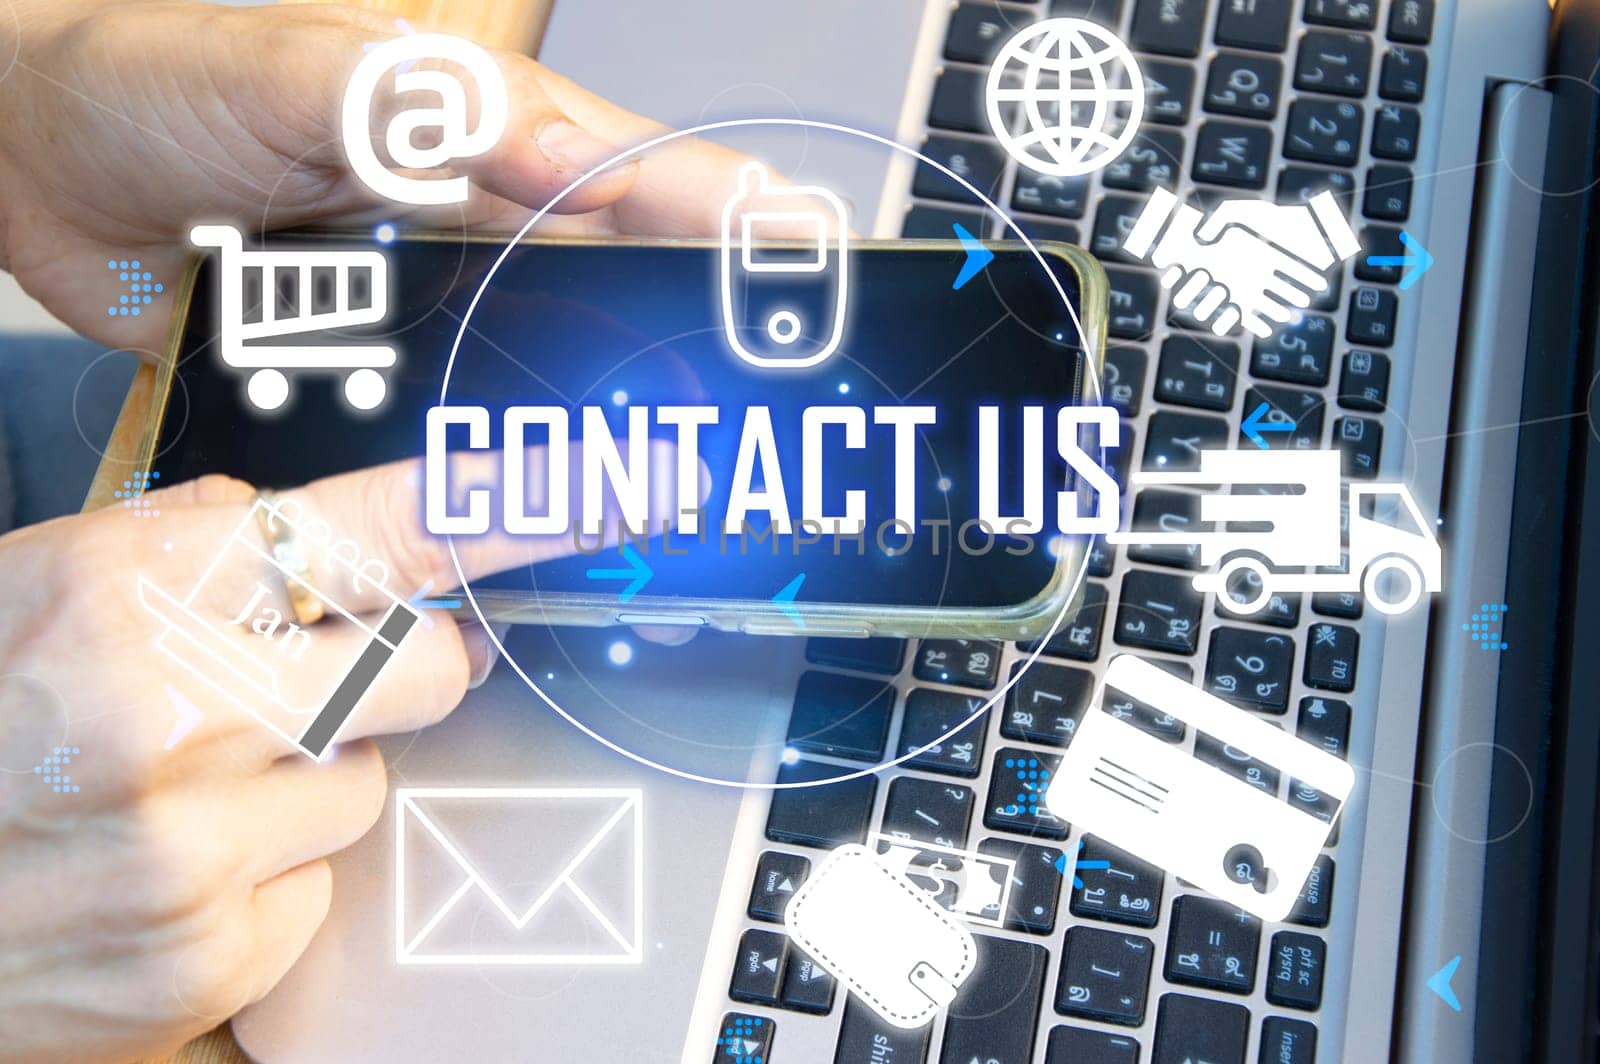 Contact us or our customer support hotline where people connect. and touch the contact icon on the virtual screen by boonruen